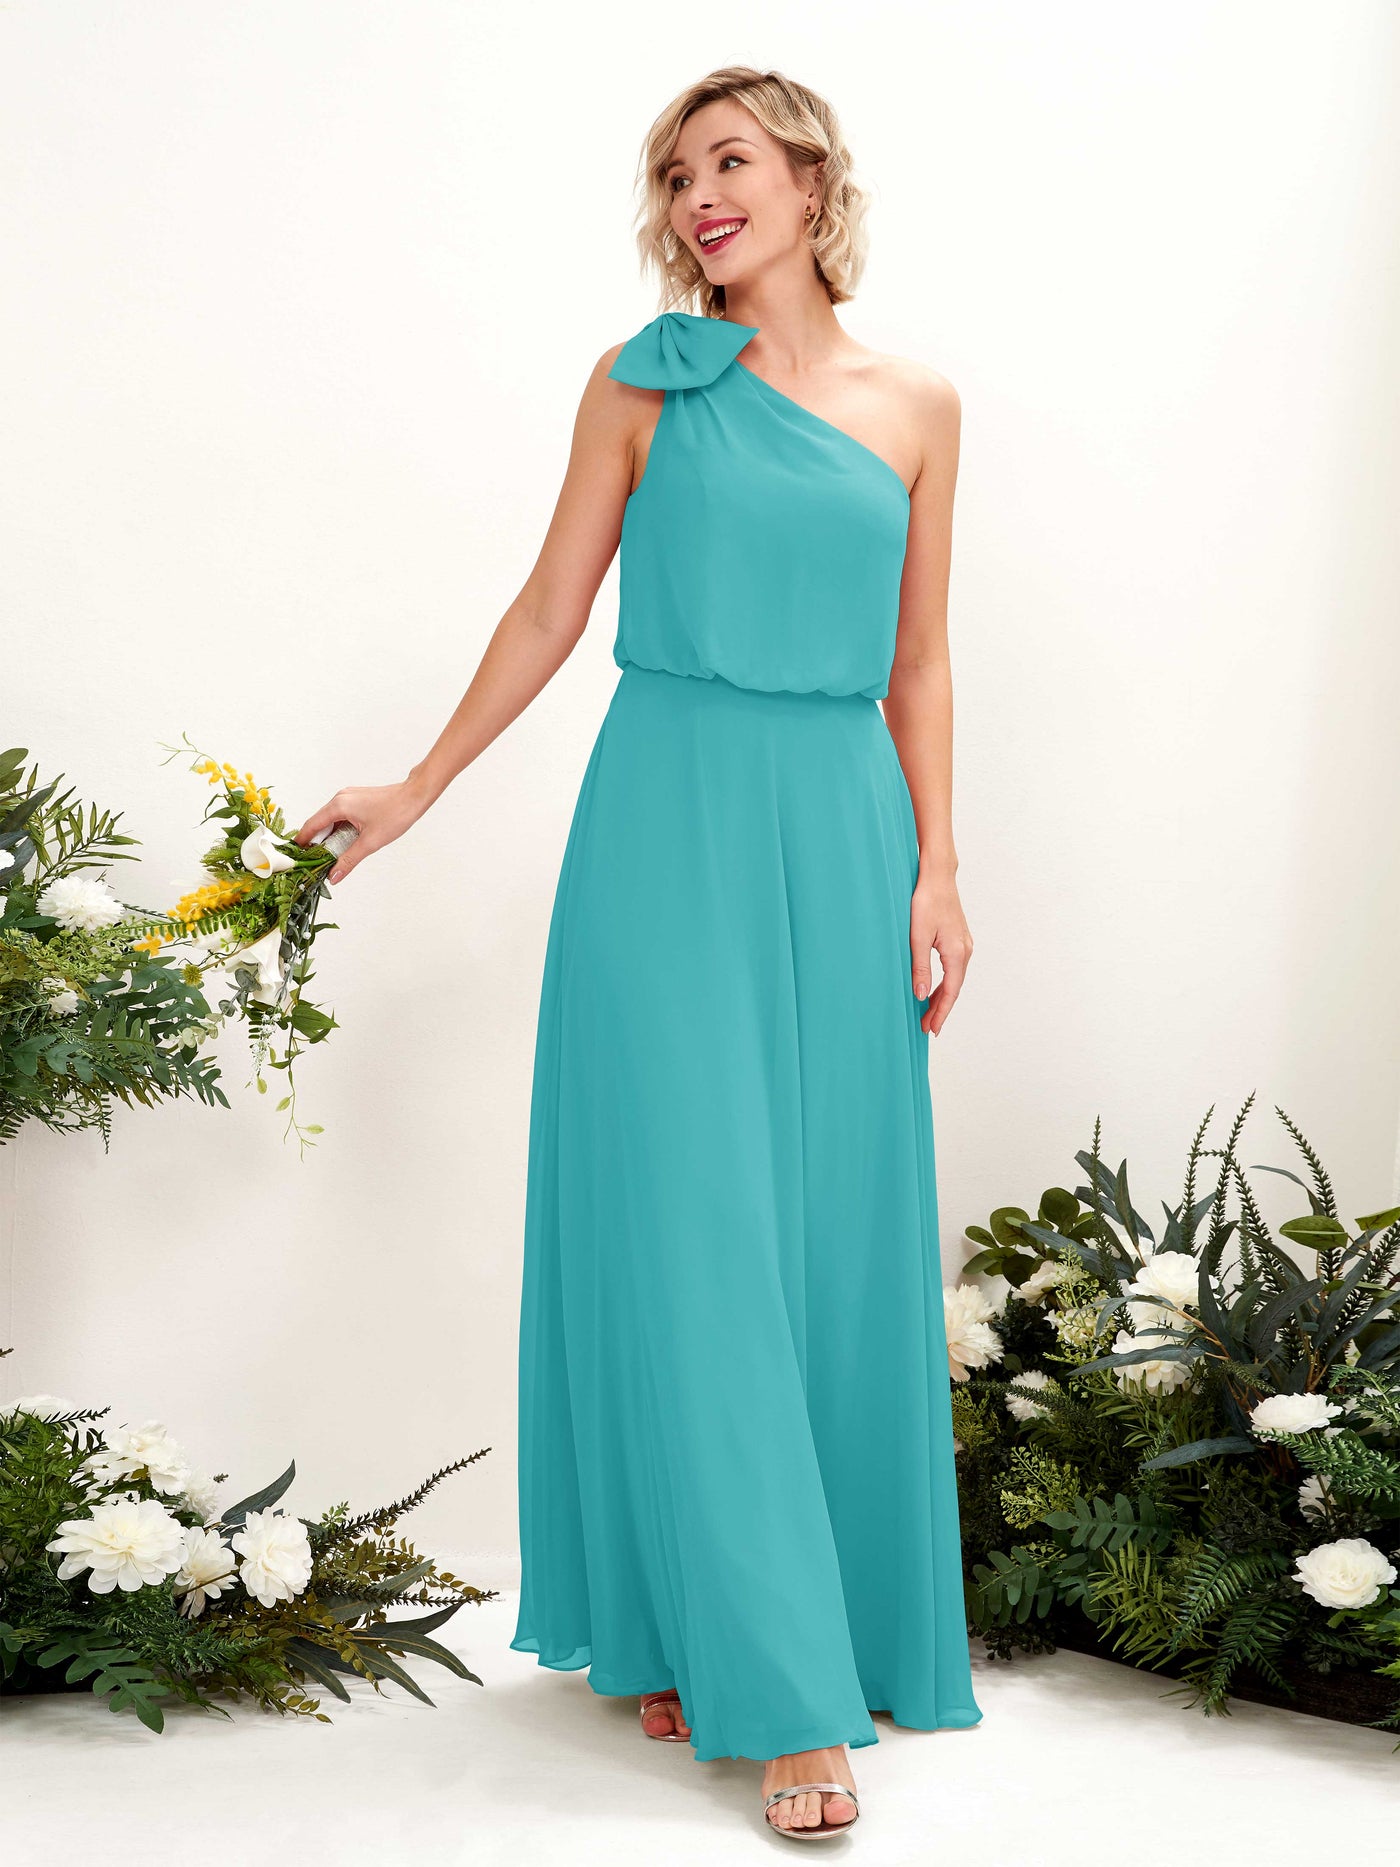 Turquoise Bridesmaid Dresses Bridesmaid Dress A-line Chiffon One Shoulder Full Length Sleeveless Wedding Party Dress (81225523)#color_turquoise